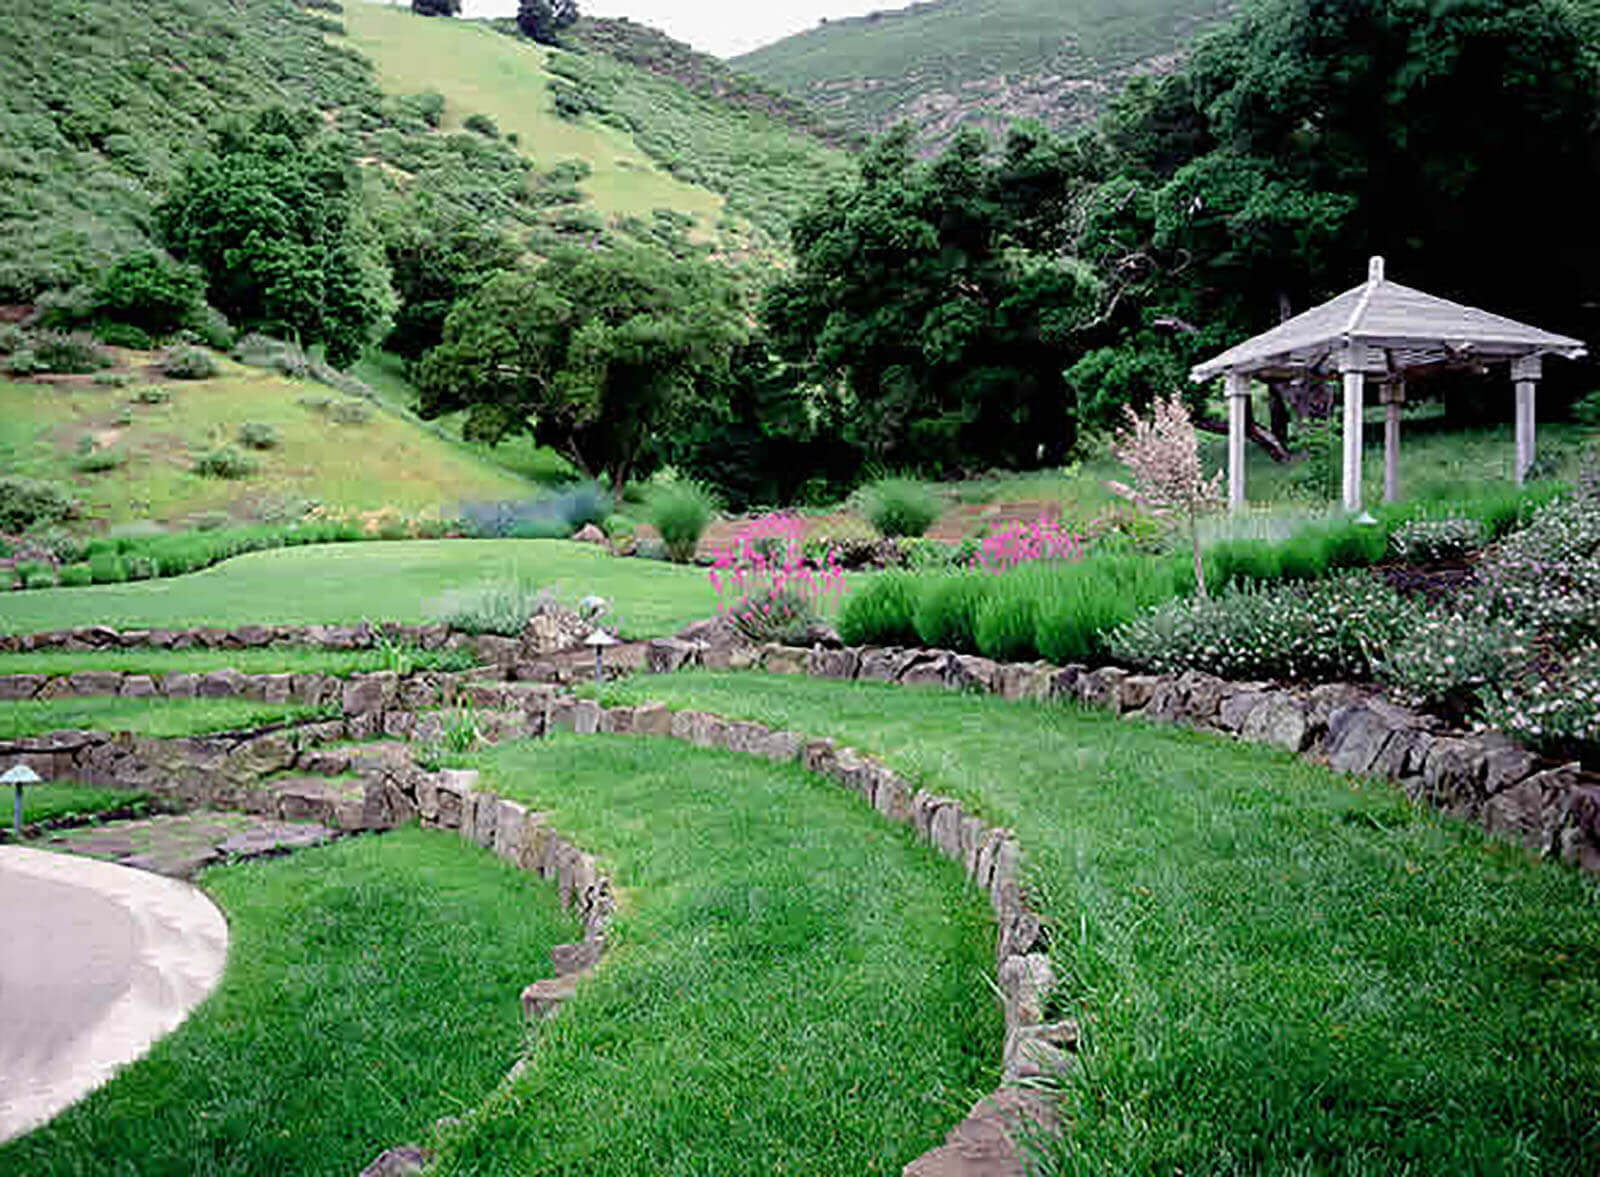 Traditional pavilion with a lush garden and amphitheater-styled lawn set into the hillside landscape